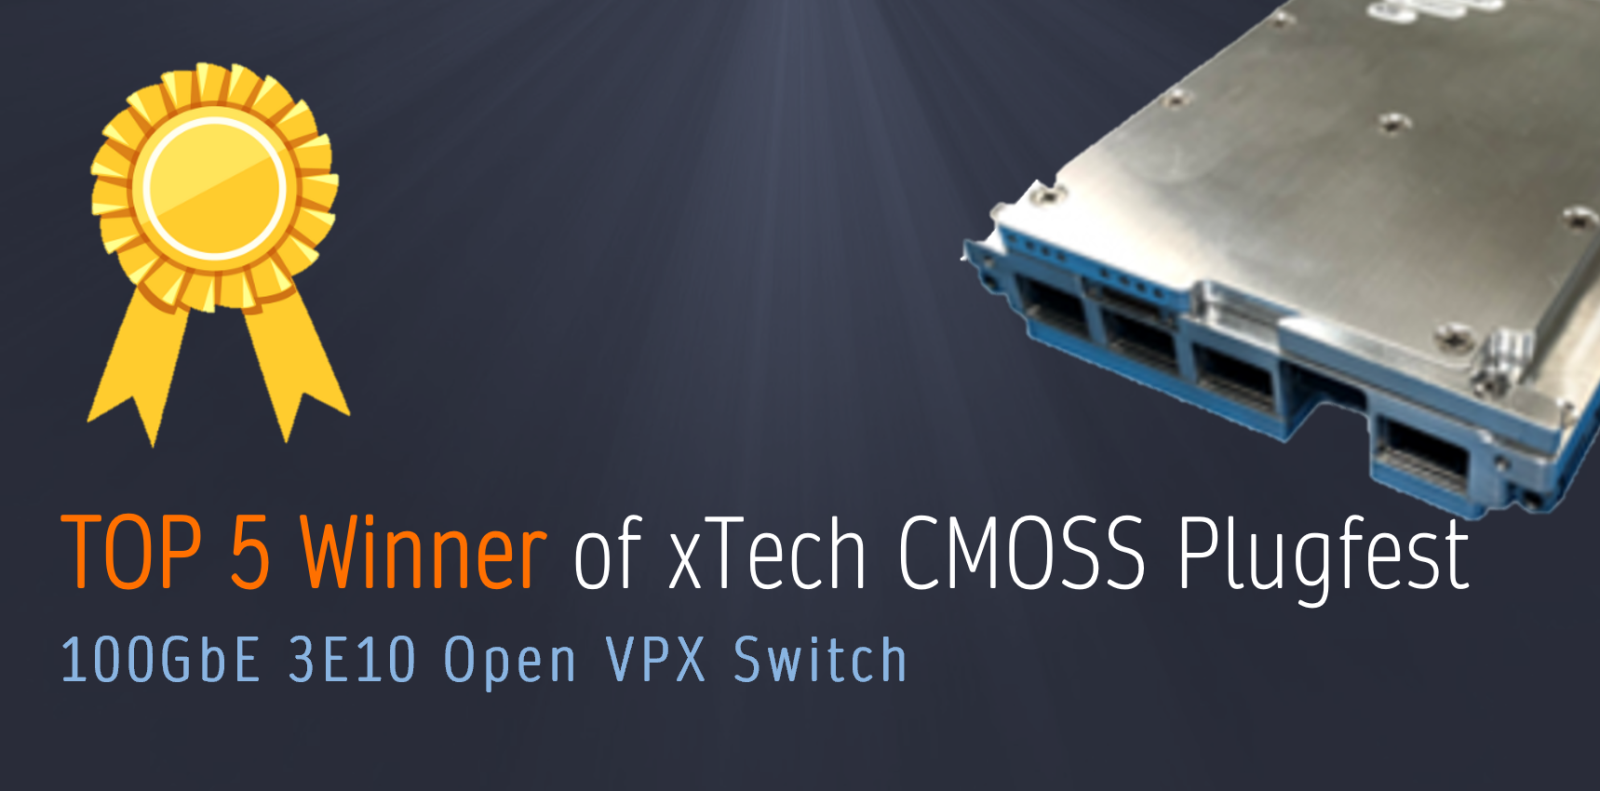 Annapolis Micro Systems 100GbE Switch Named as a Top-5 Winner in CMOSS Plugfest Competition